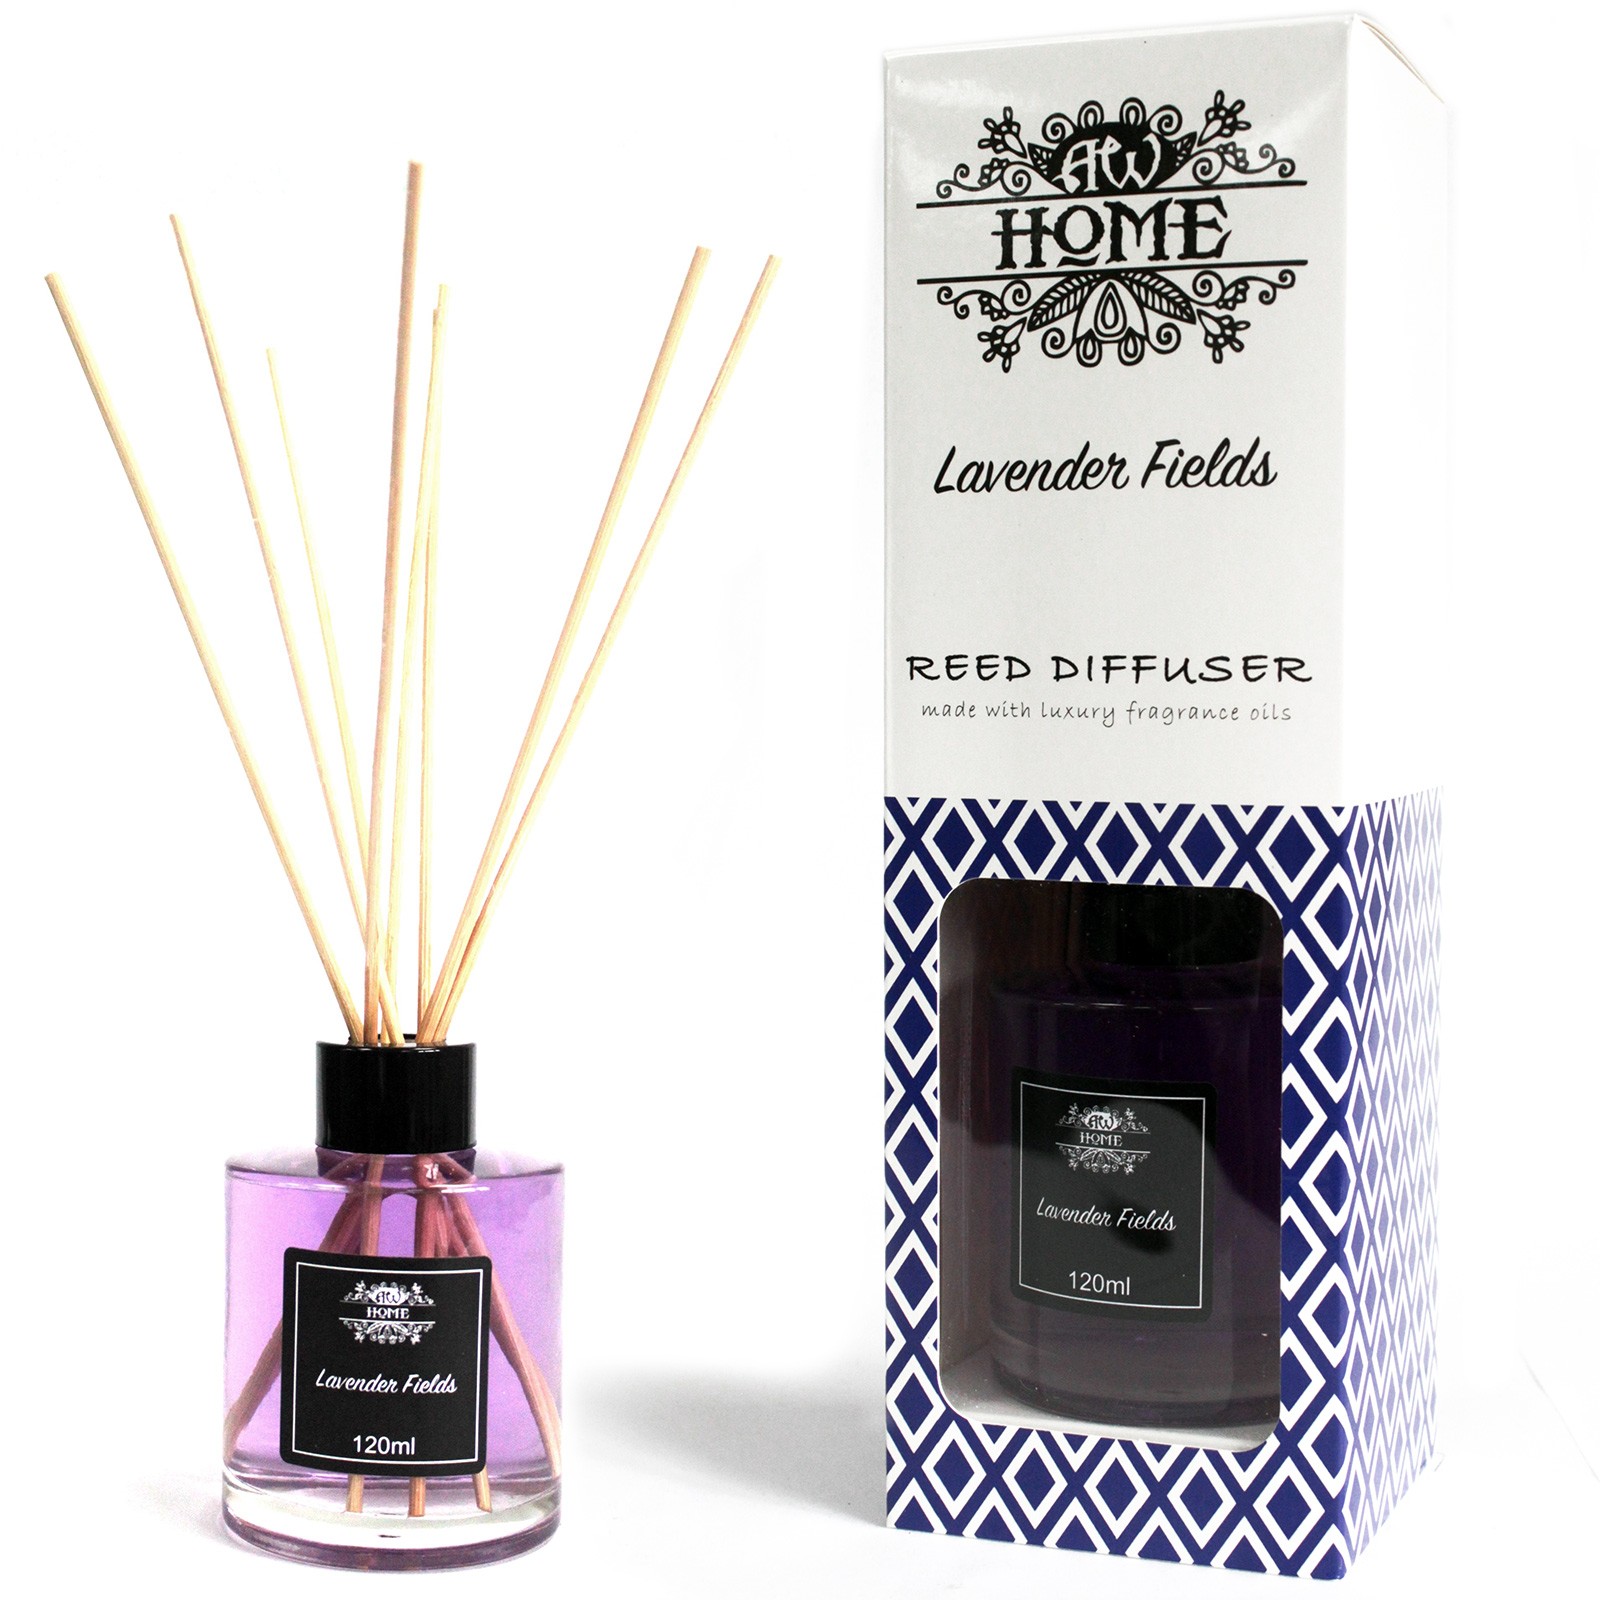 Lavender Fields - 120ml Reed Diffuser